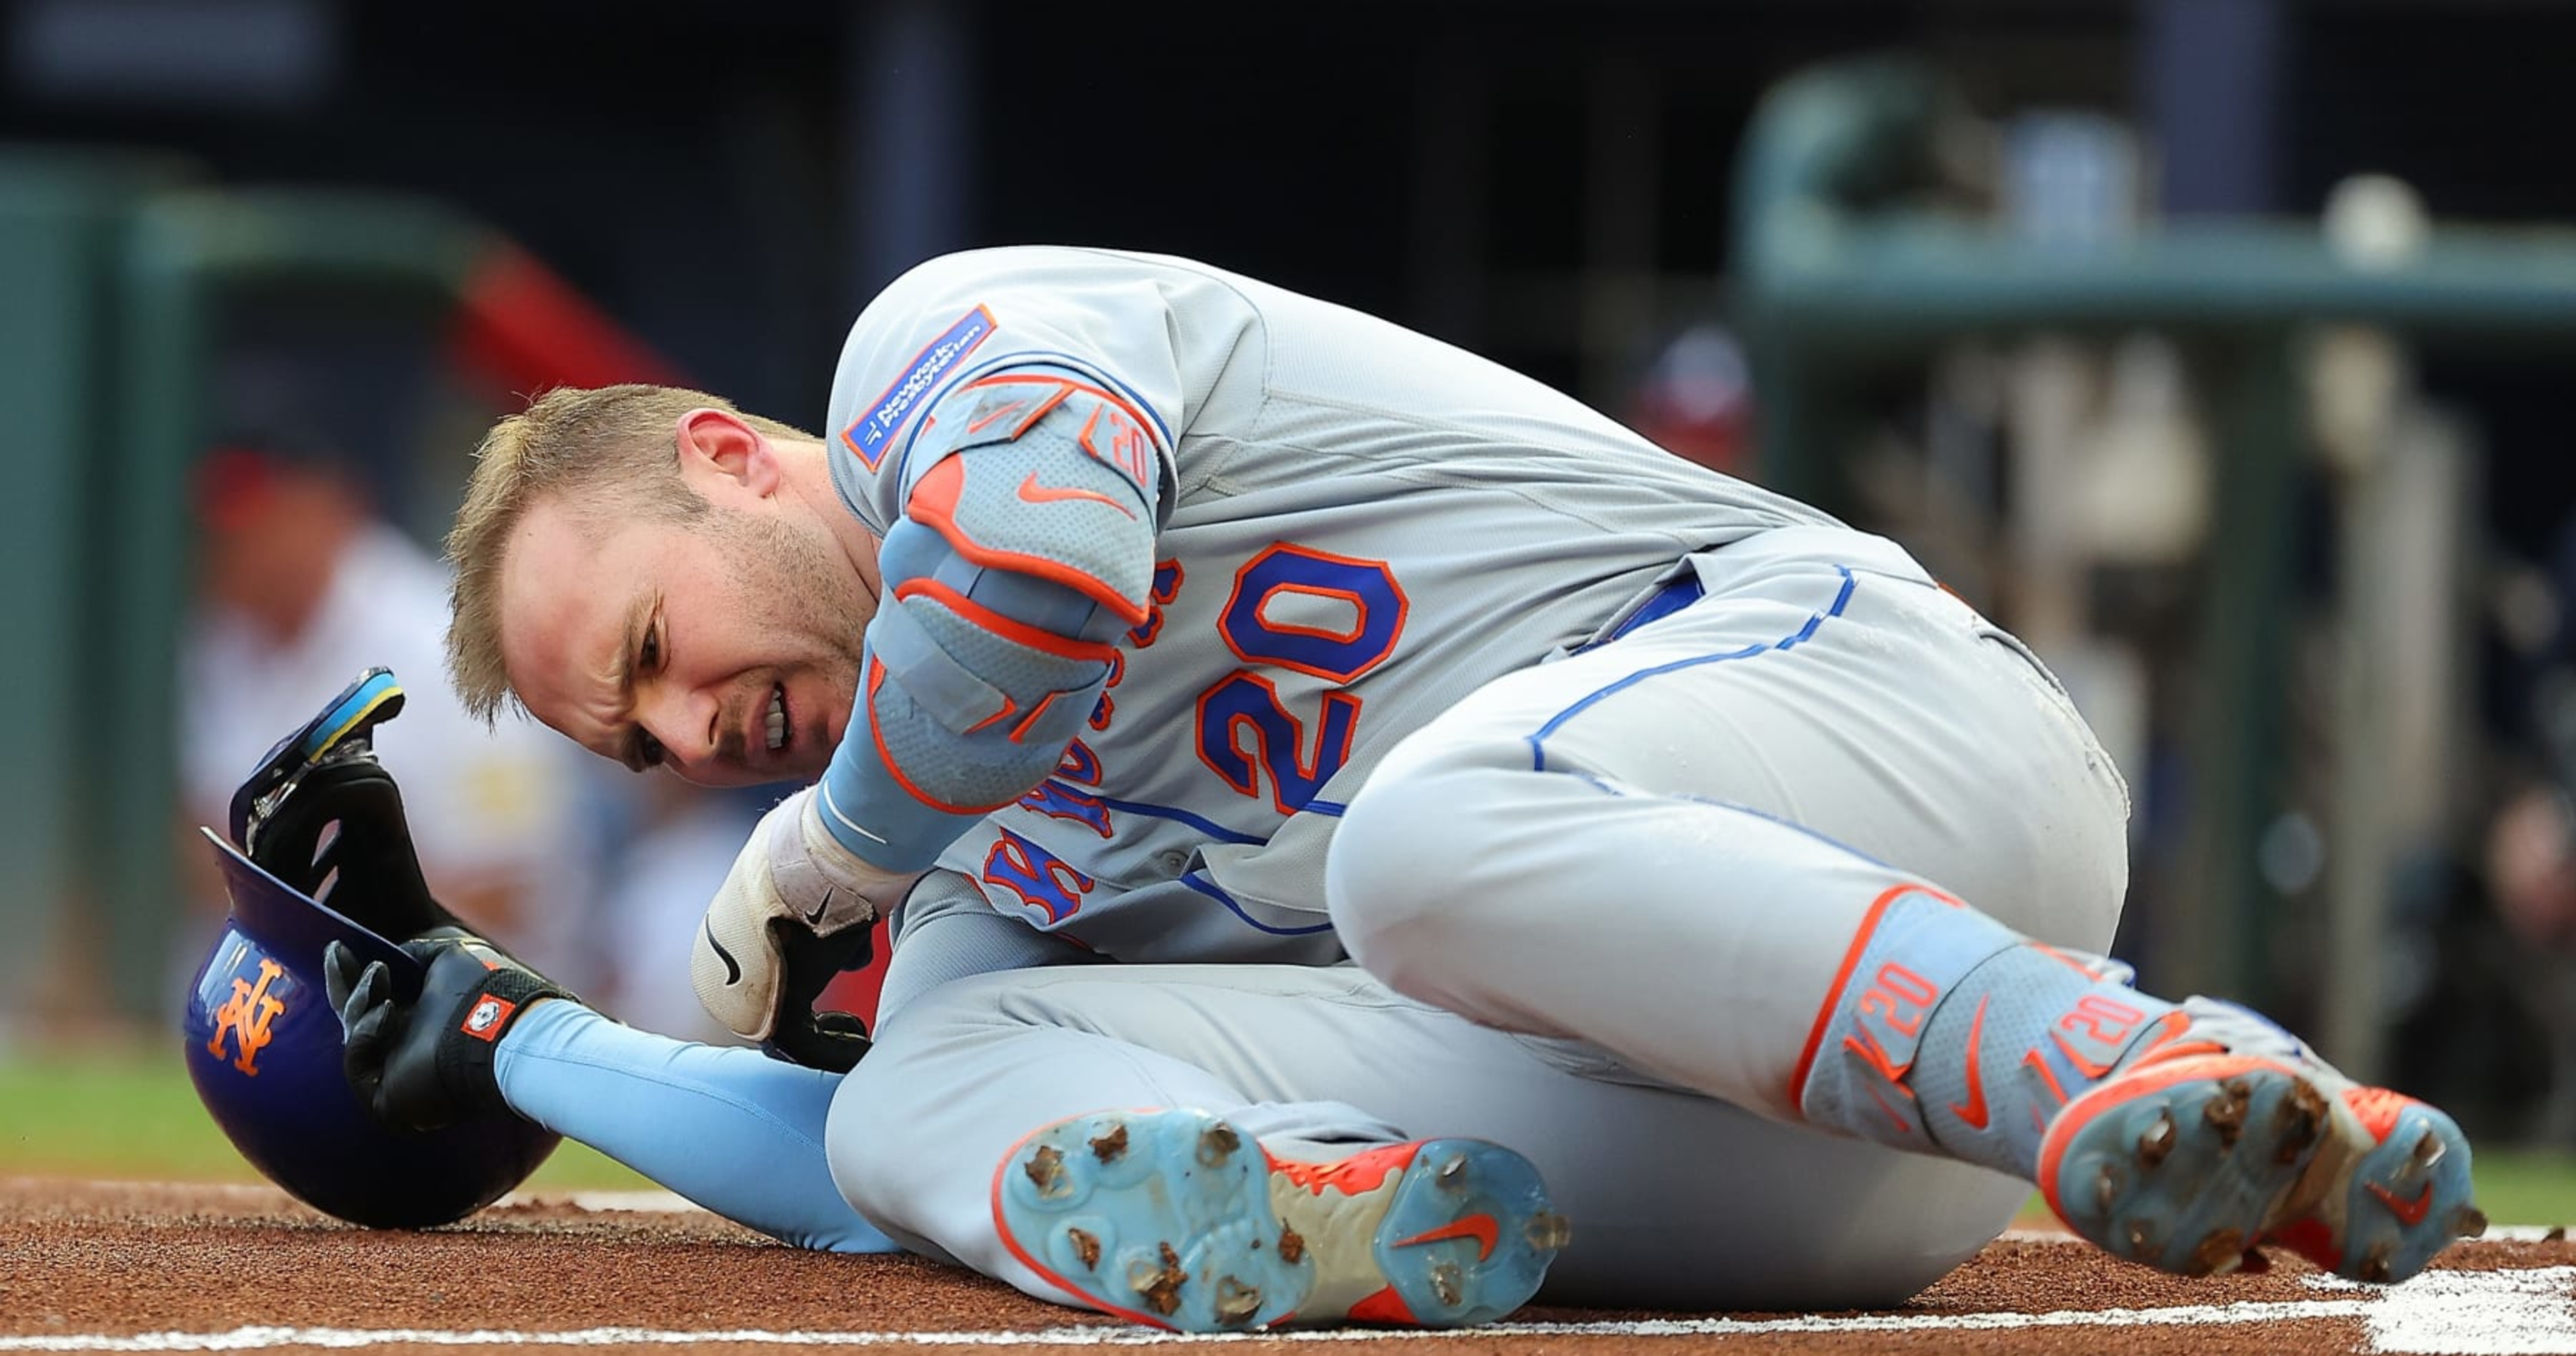 Mets provide Pete Alonso update after HBP